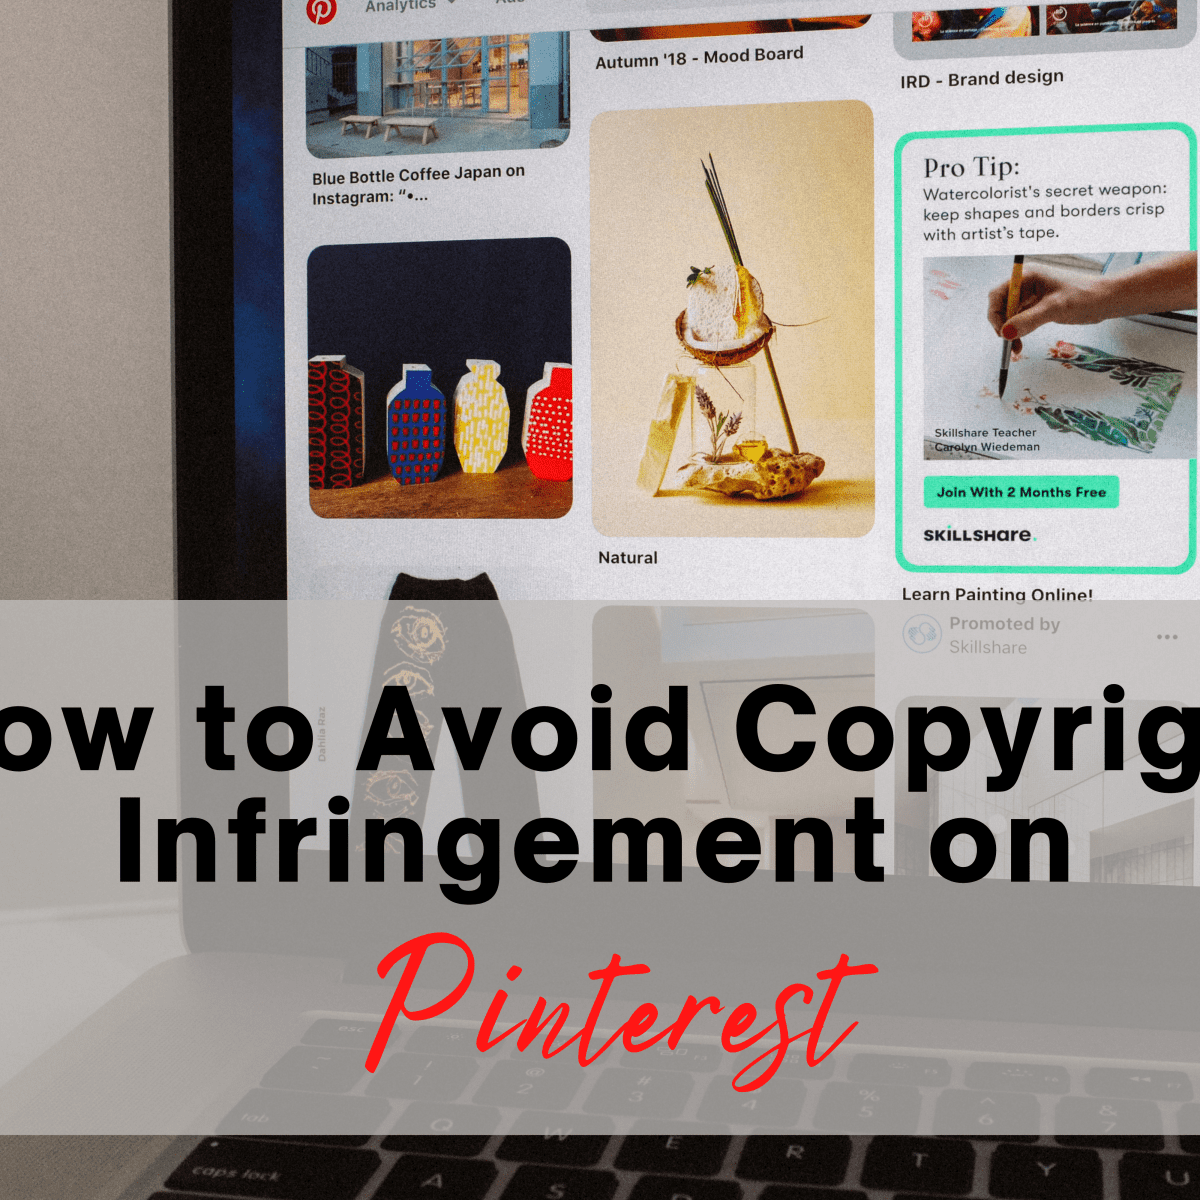 Losjes dronken monster Pinterest and Copyright: How to Use Pinterest Legally - TurboFuture